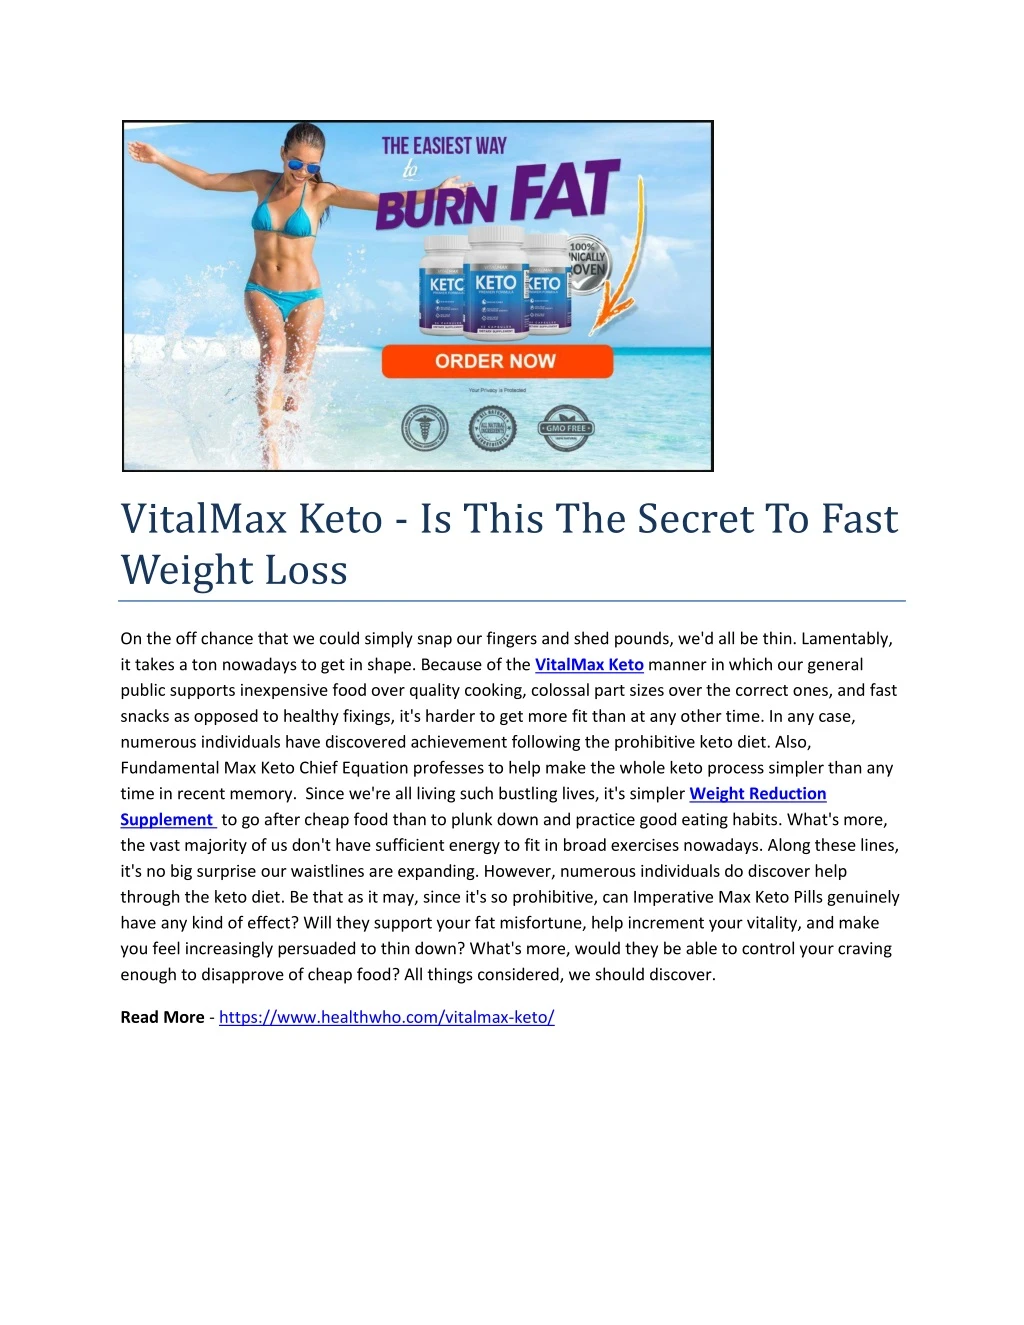 vitalmax keto is this the secret to fast weight